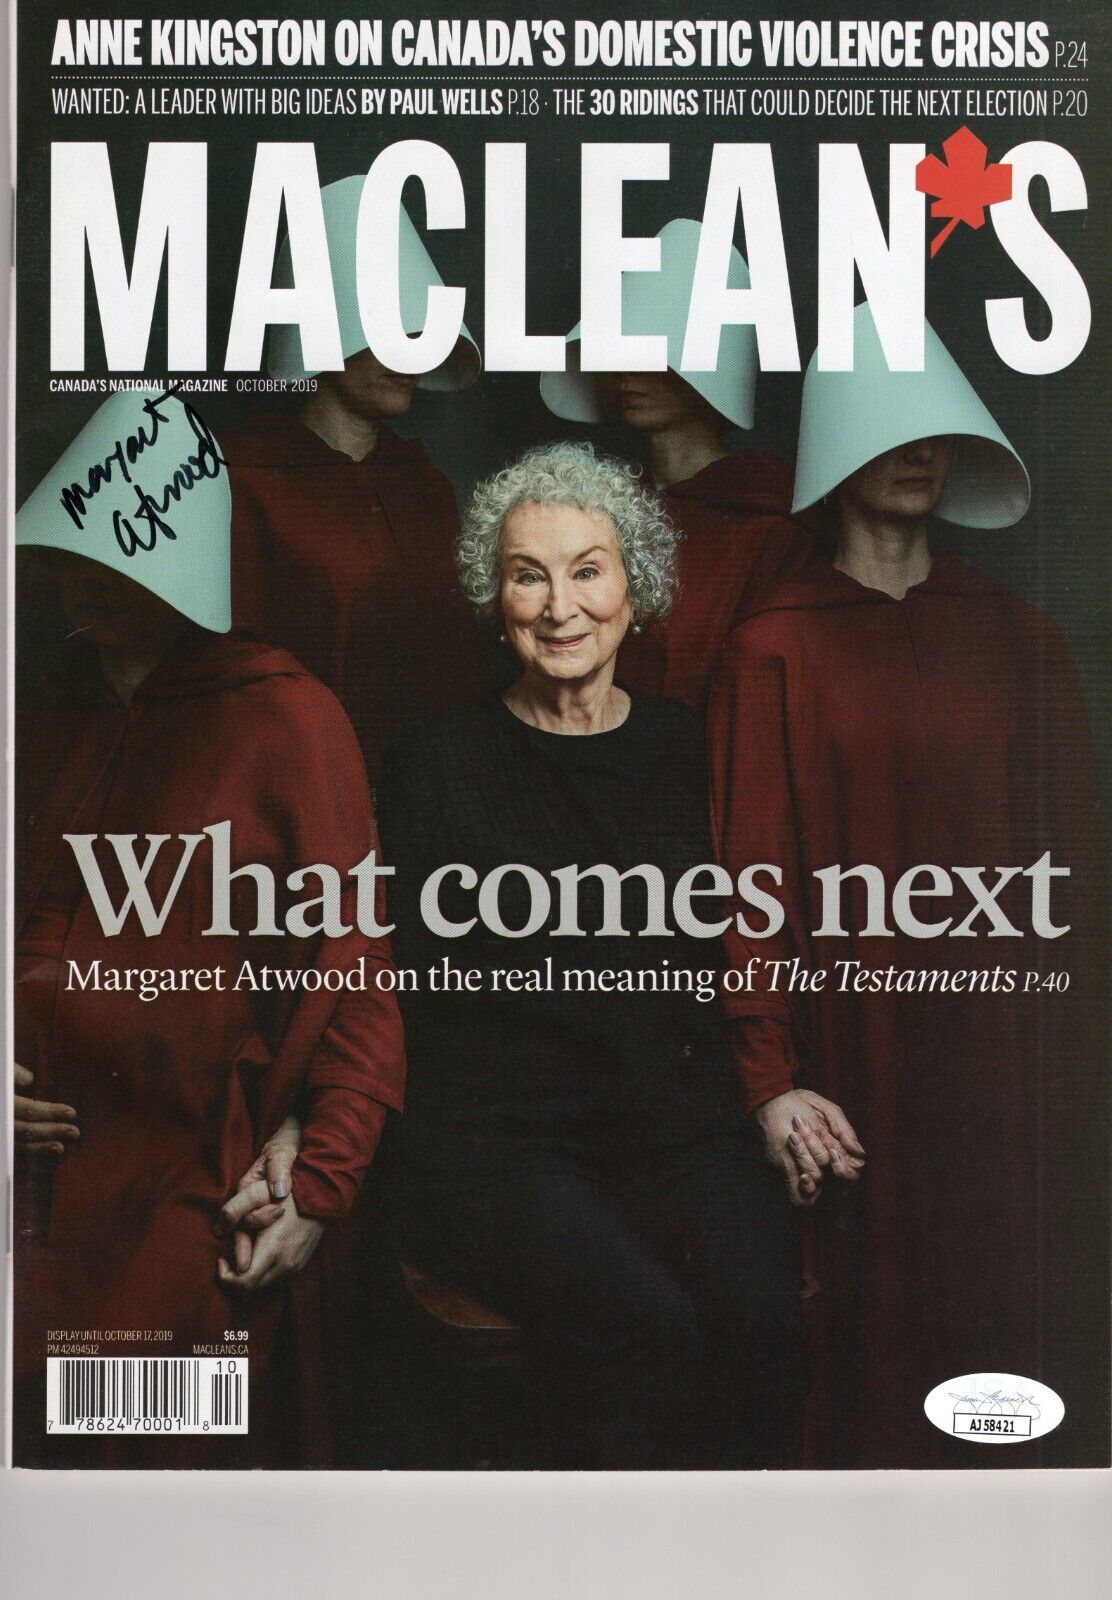 MARGARET ATWOOD SIGNED  MACLEAN'S MAGAZINE  THE HANDSMAID'S TALE JSA COA PROOF